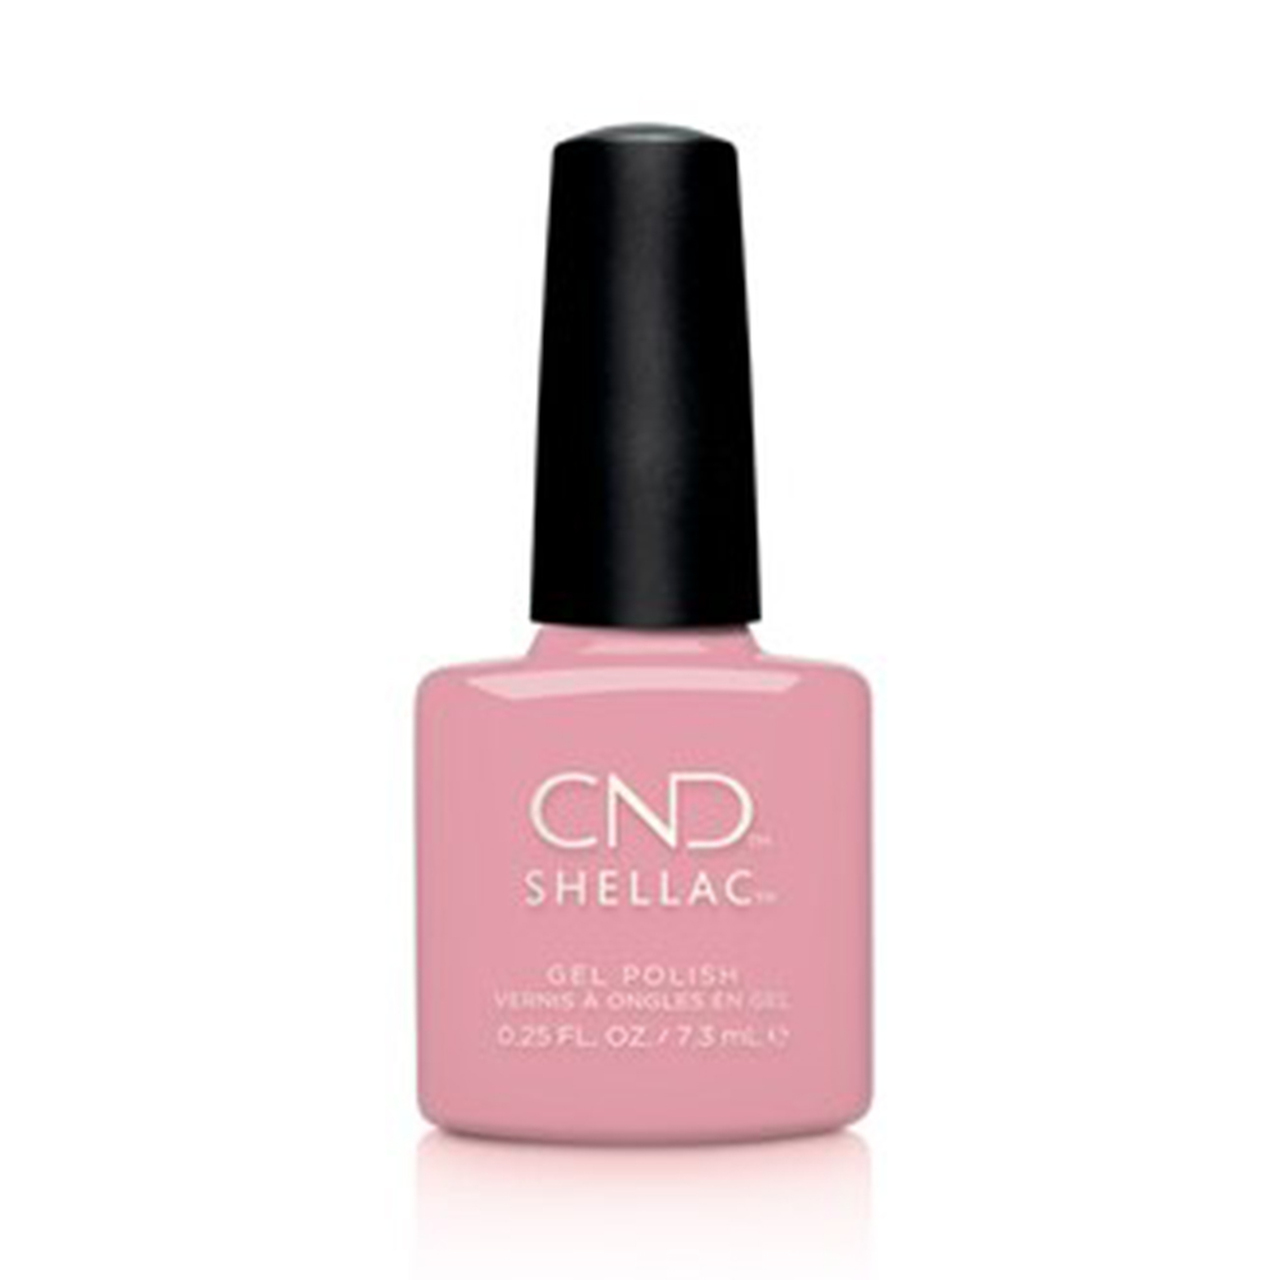 CND Shellac - Pacific Rose - CND UK Distributor | Now ?12 Each